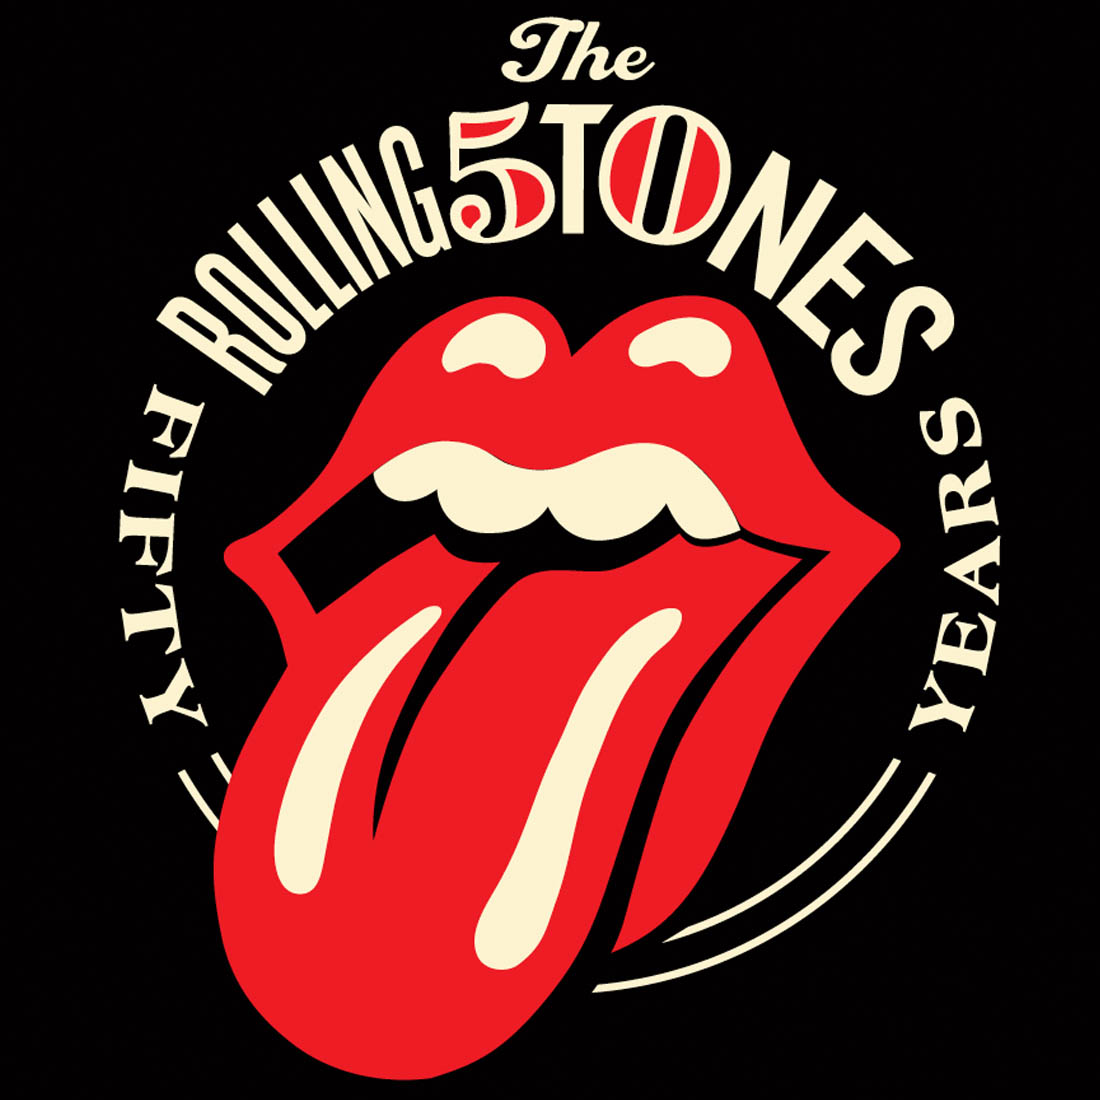 The Rolling Stones Story image